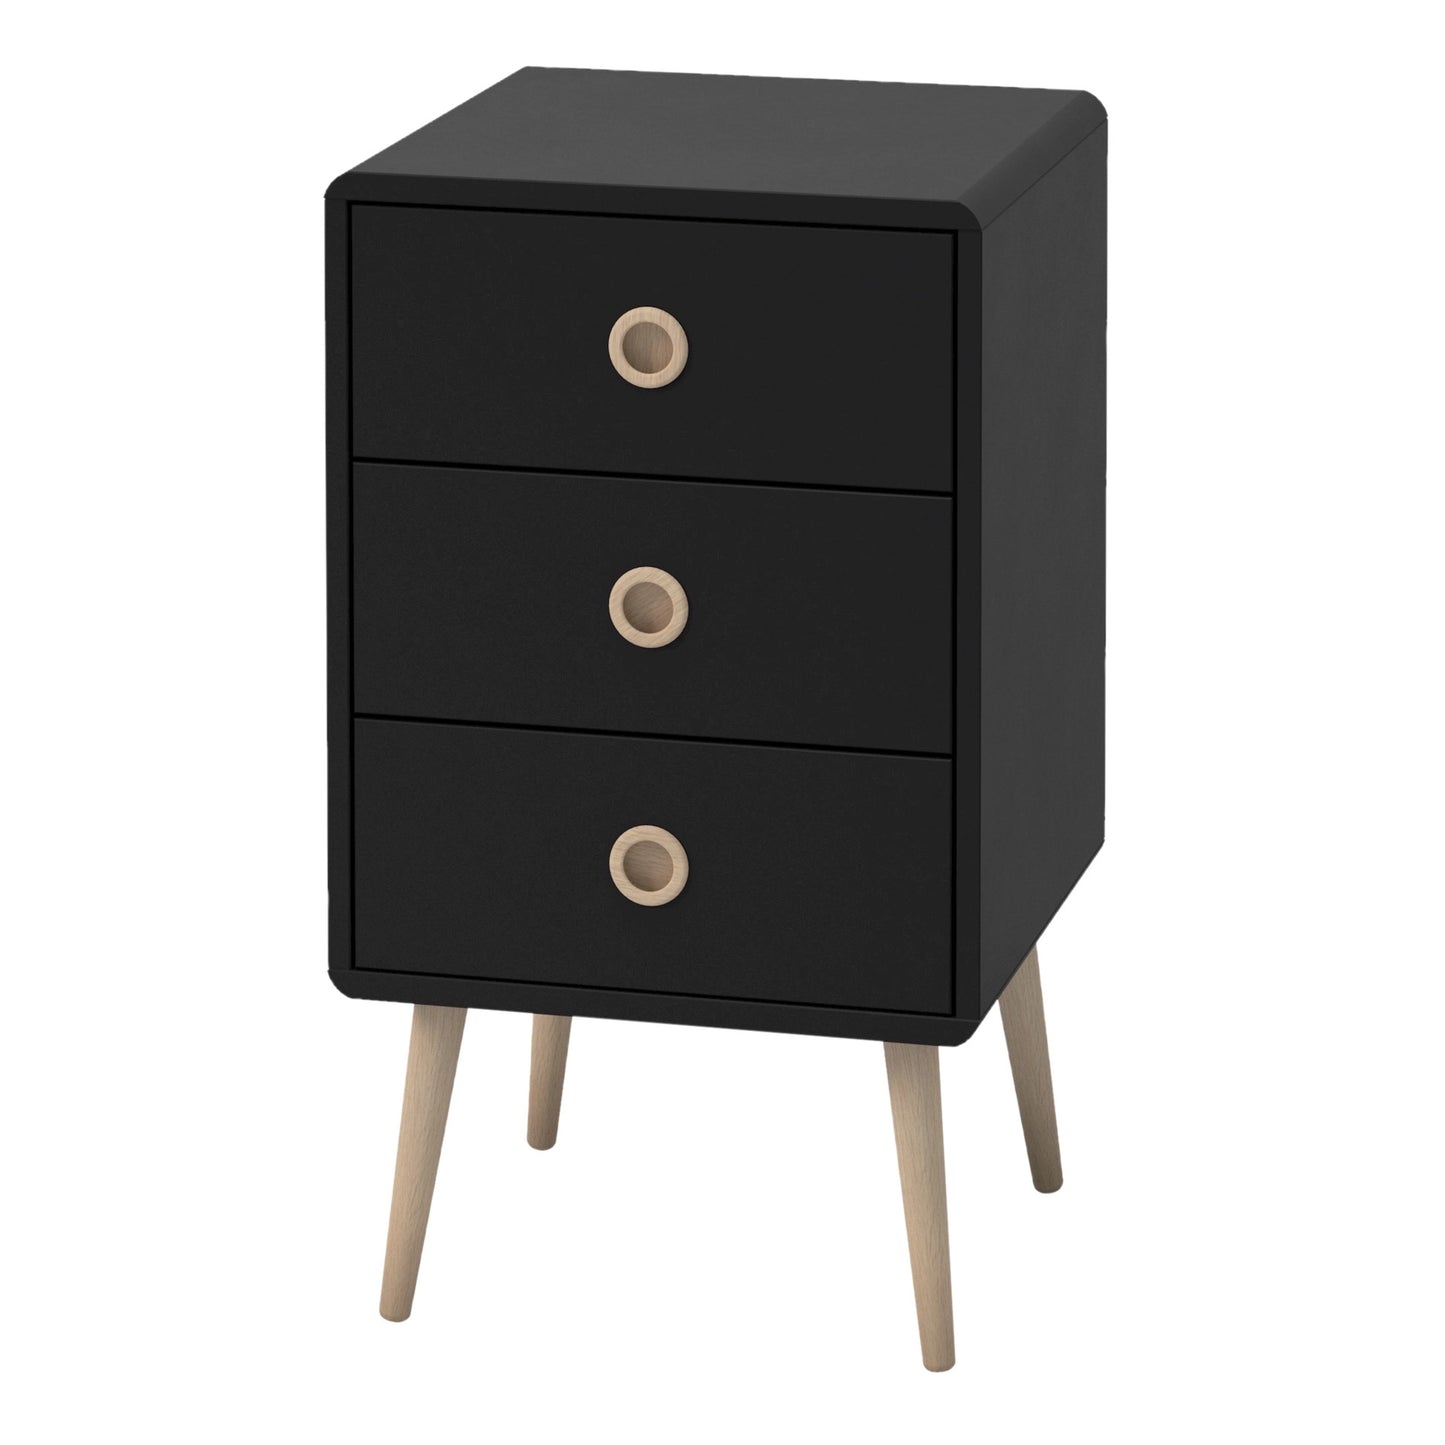 Furniture To Go Softline 3 Drawer Chest Black Painted